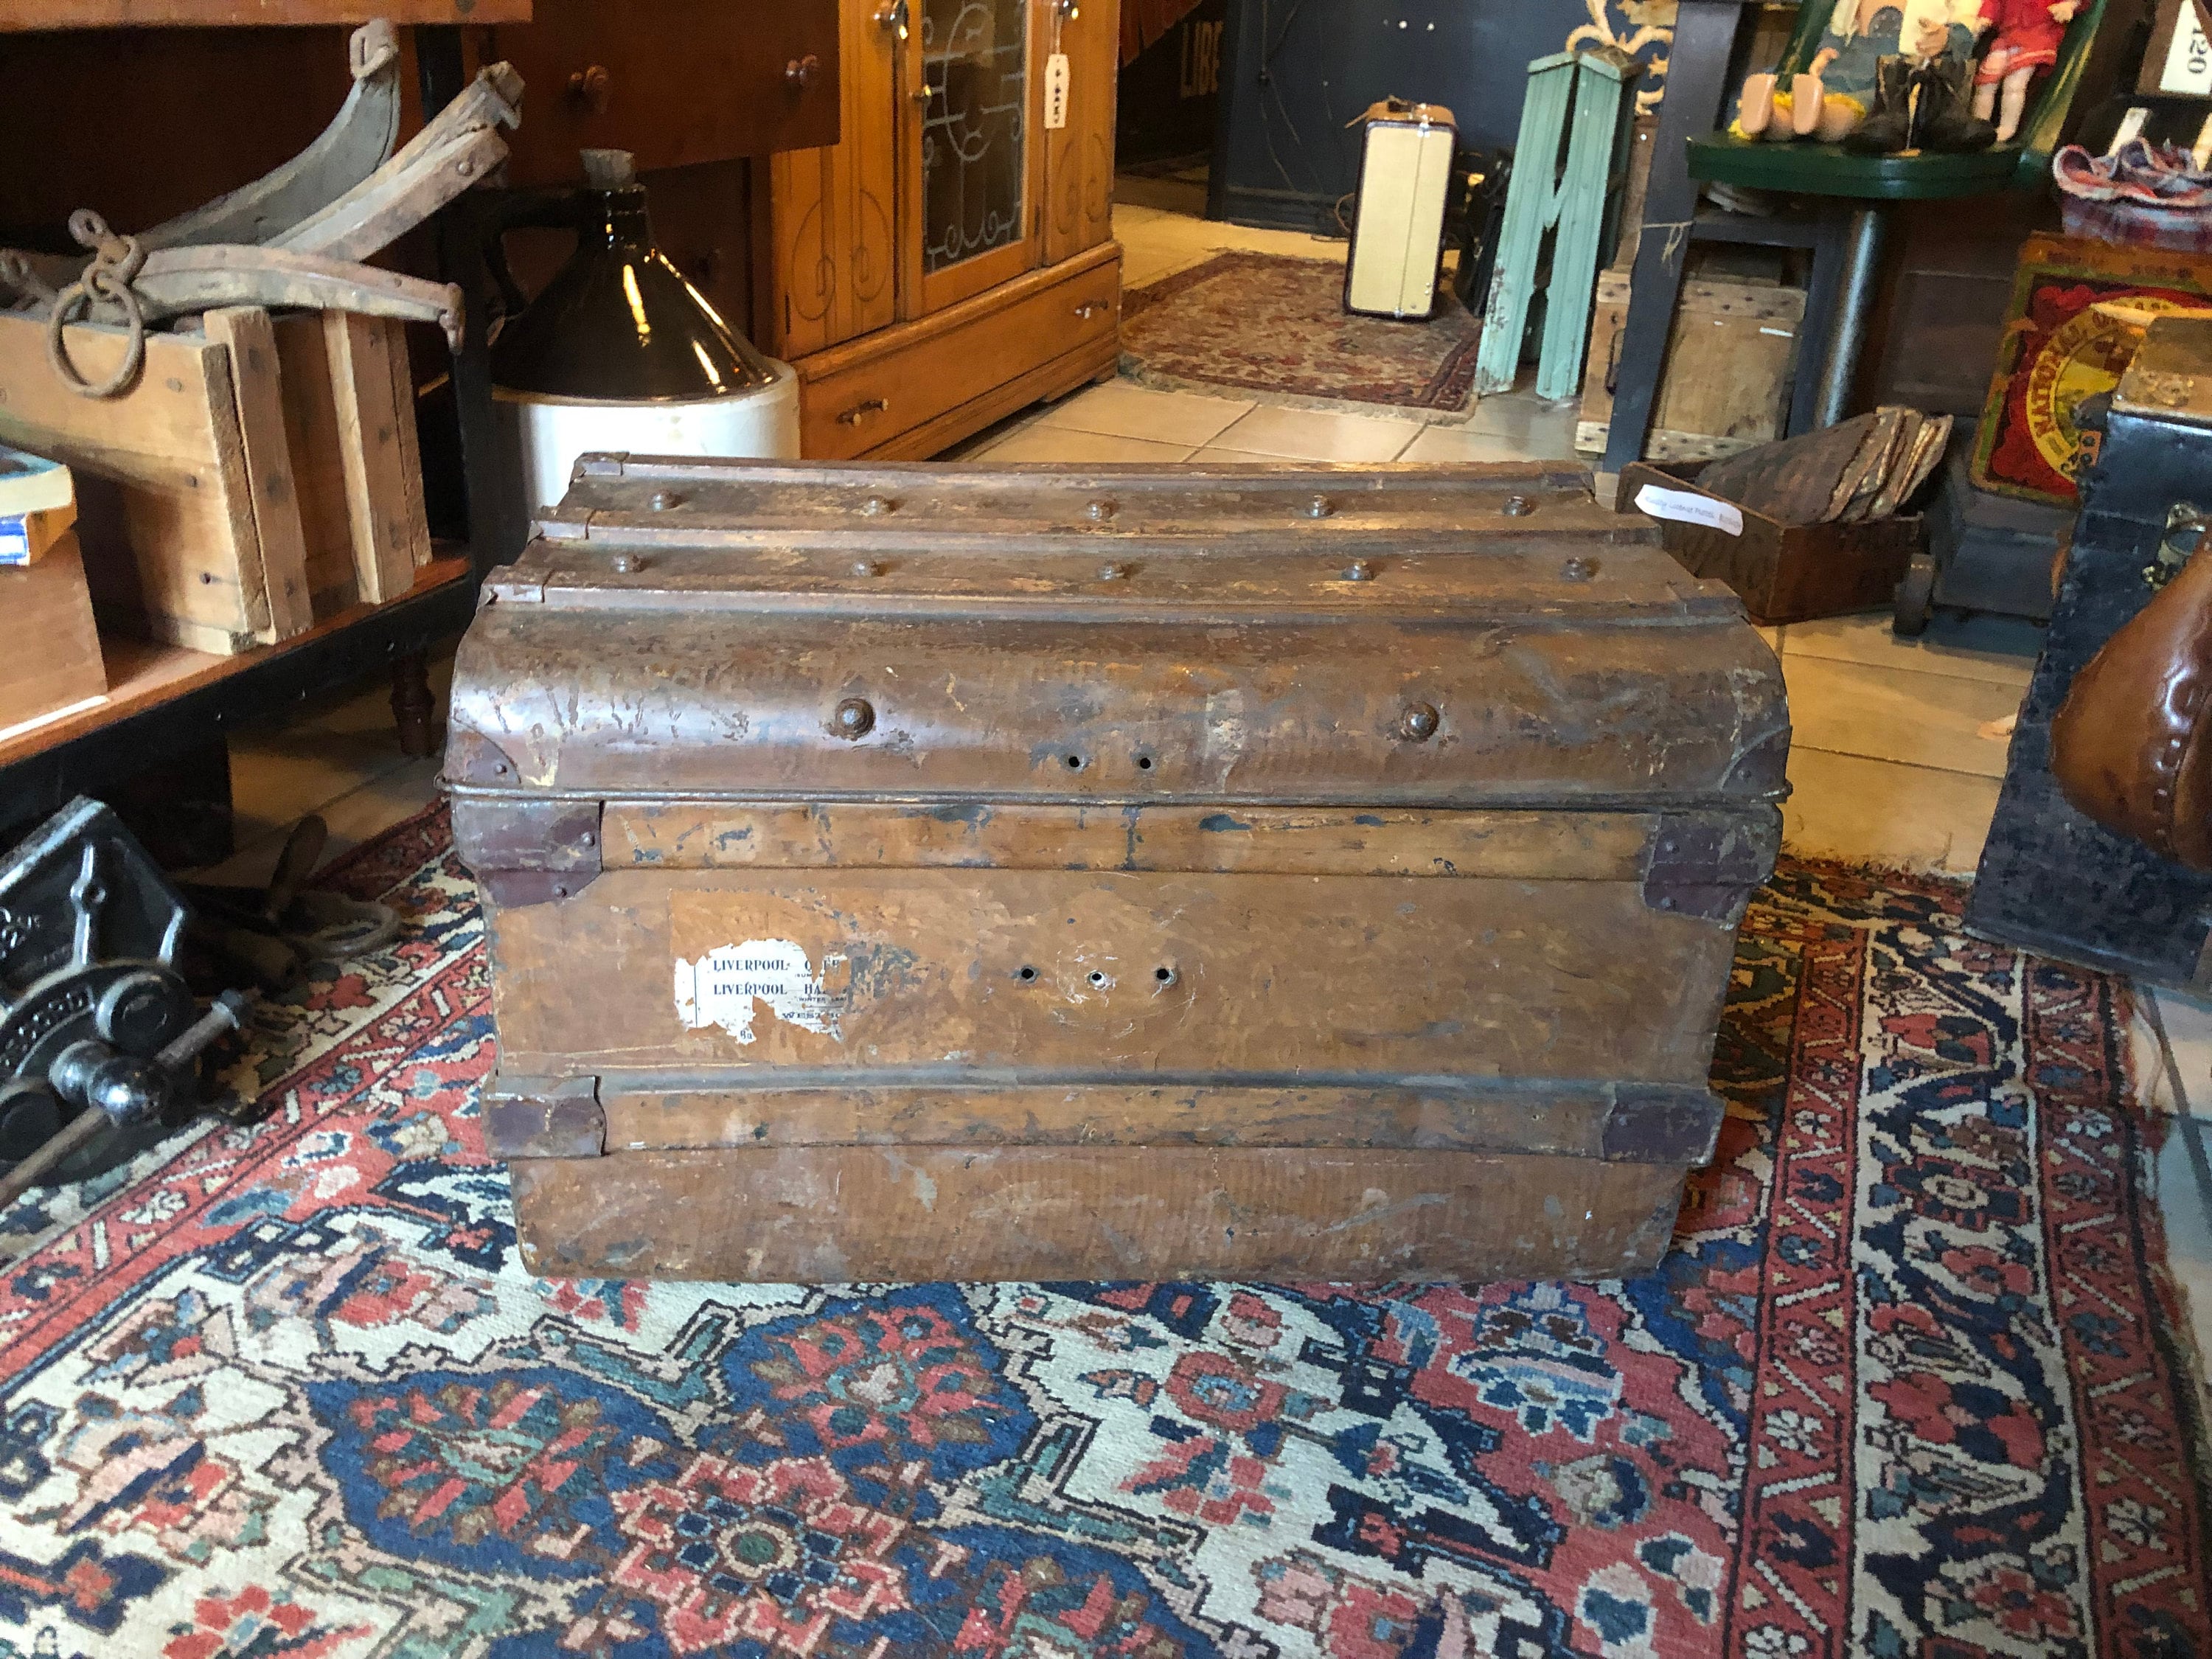 Antique Ornate Large Travel Trunk, Steamer Trunk, Late 19th Century. - Ruby  Lane